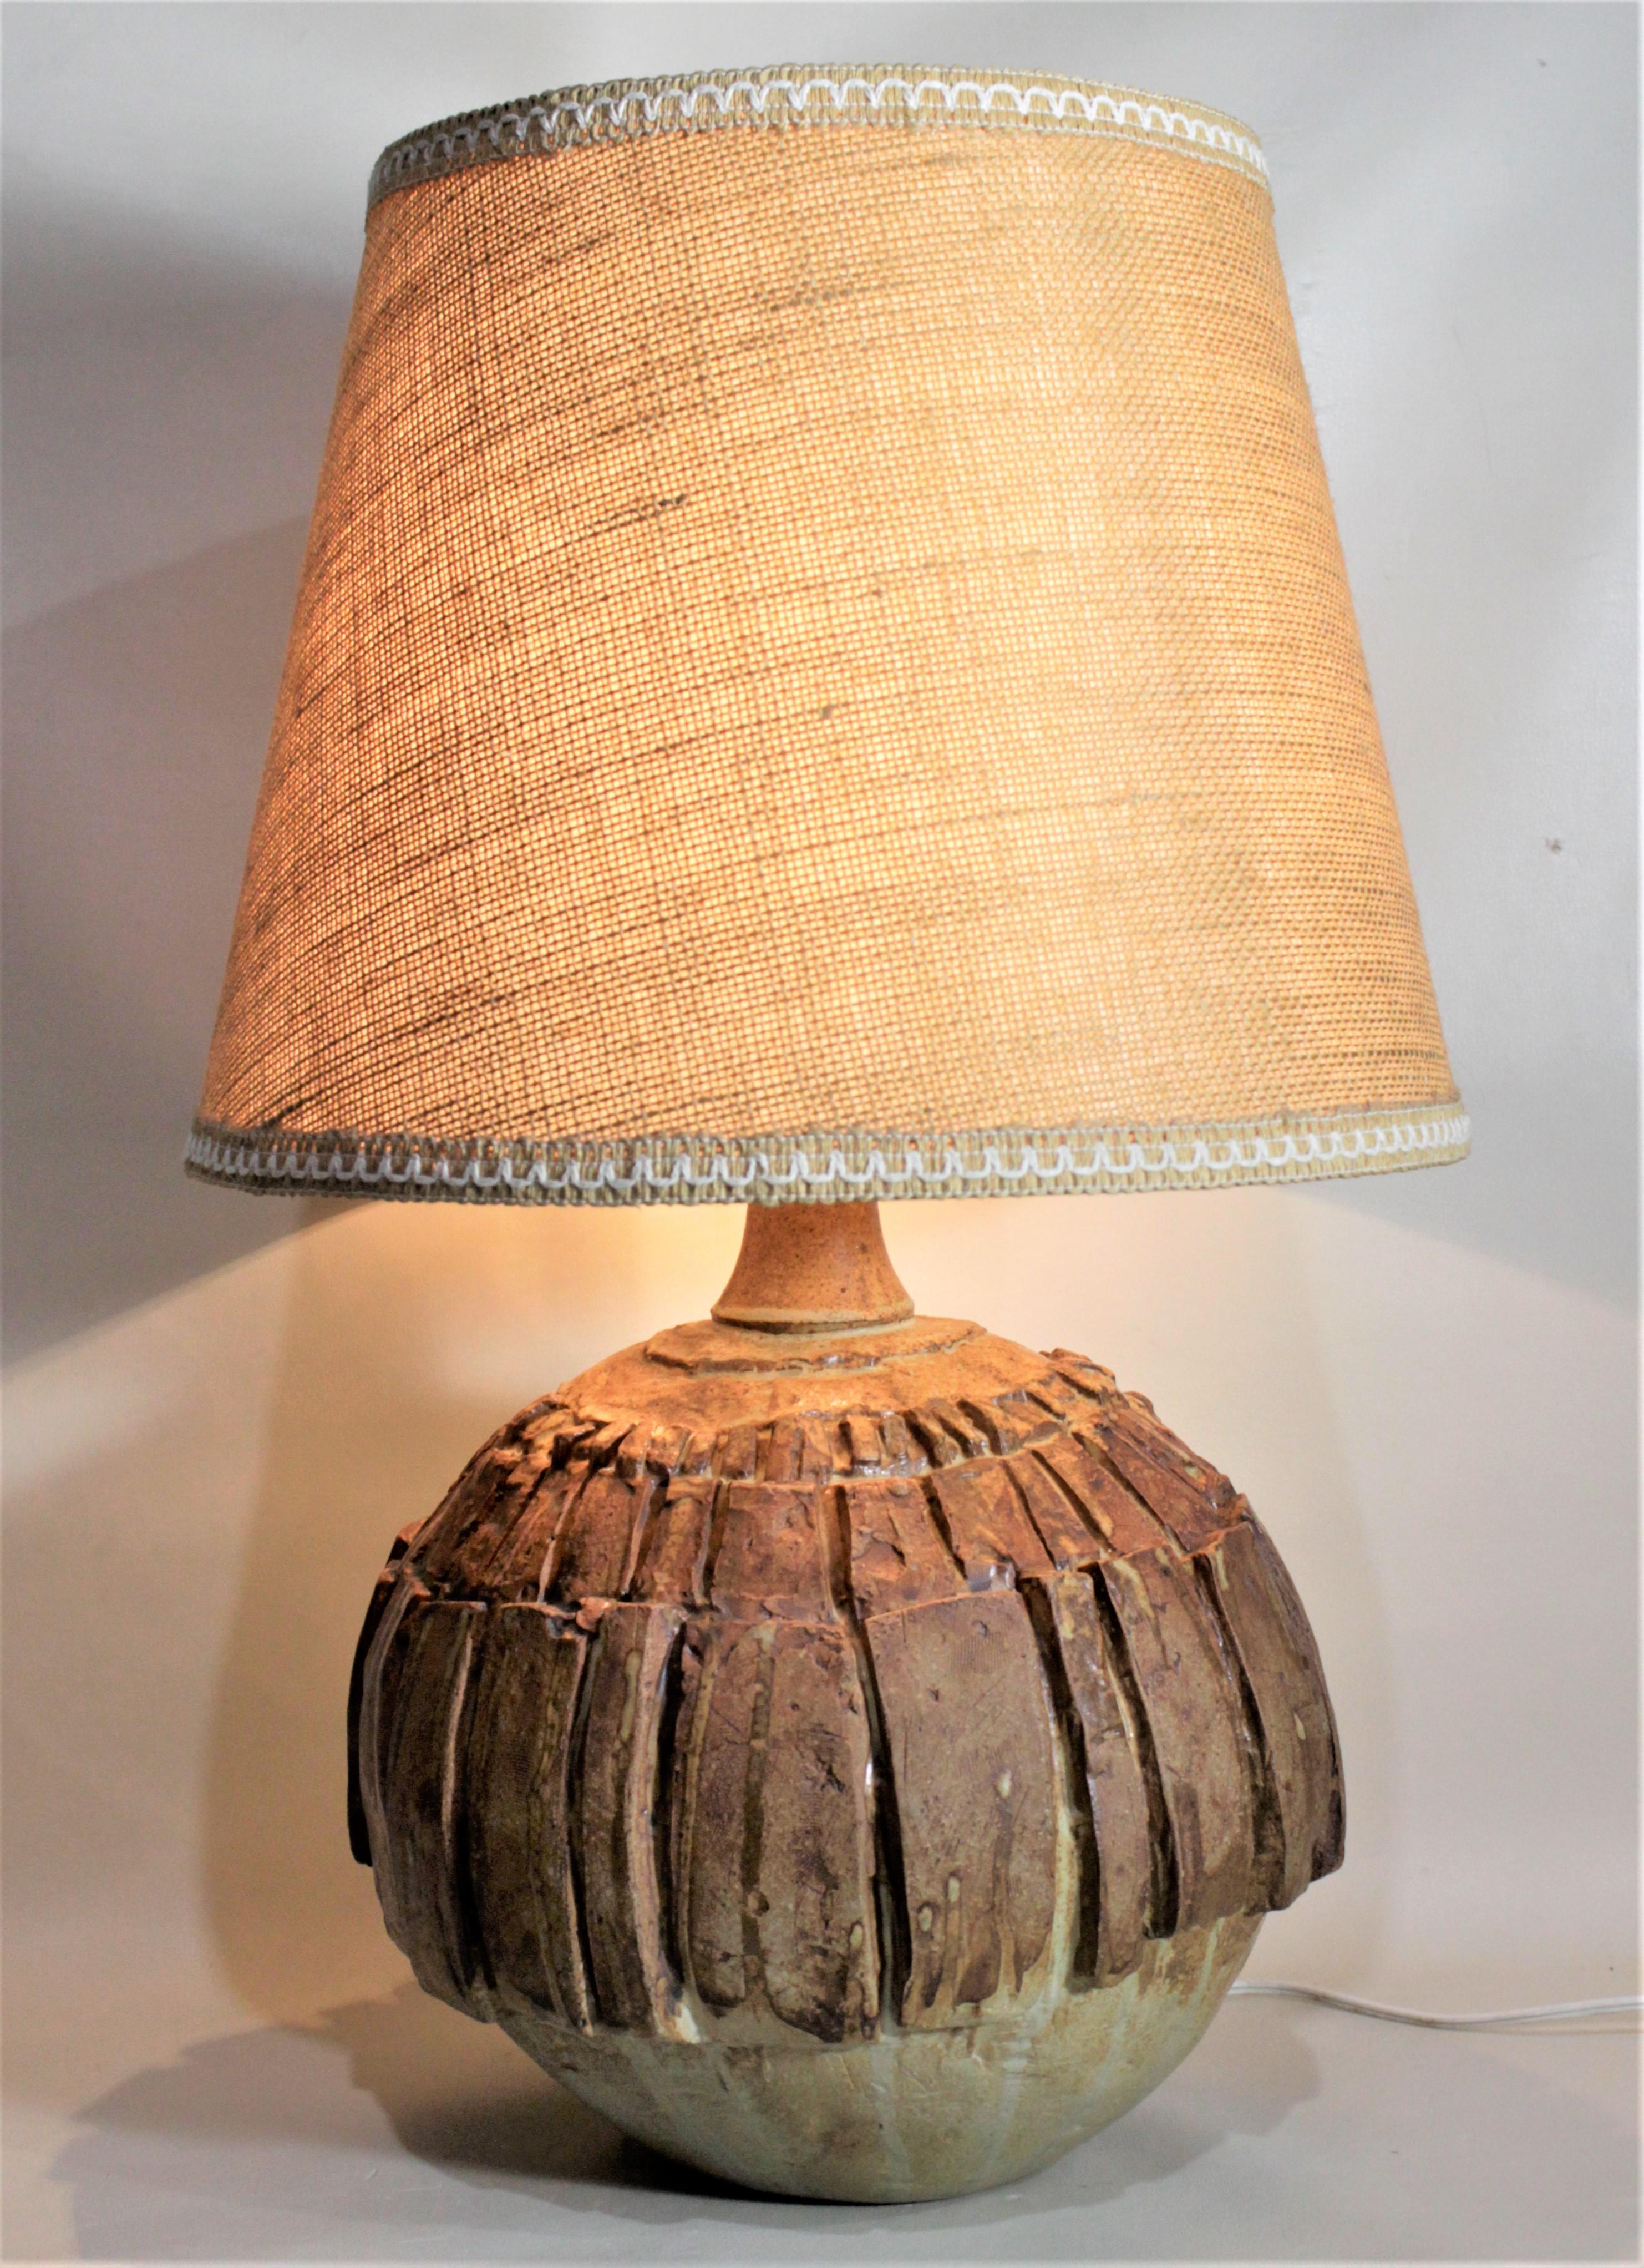 Hand-Crafted Bernard Rooke Signed Mid-Century Modern Brutalist Art Pottery Table Lamp